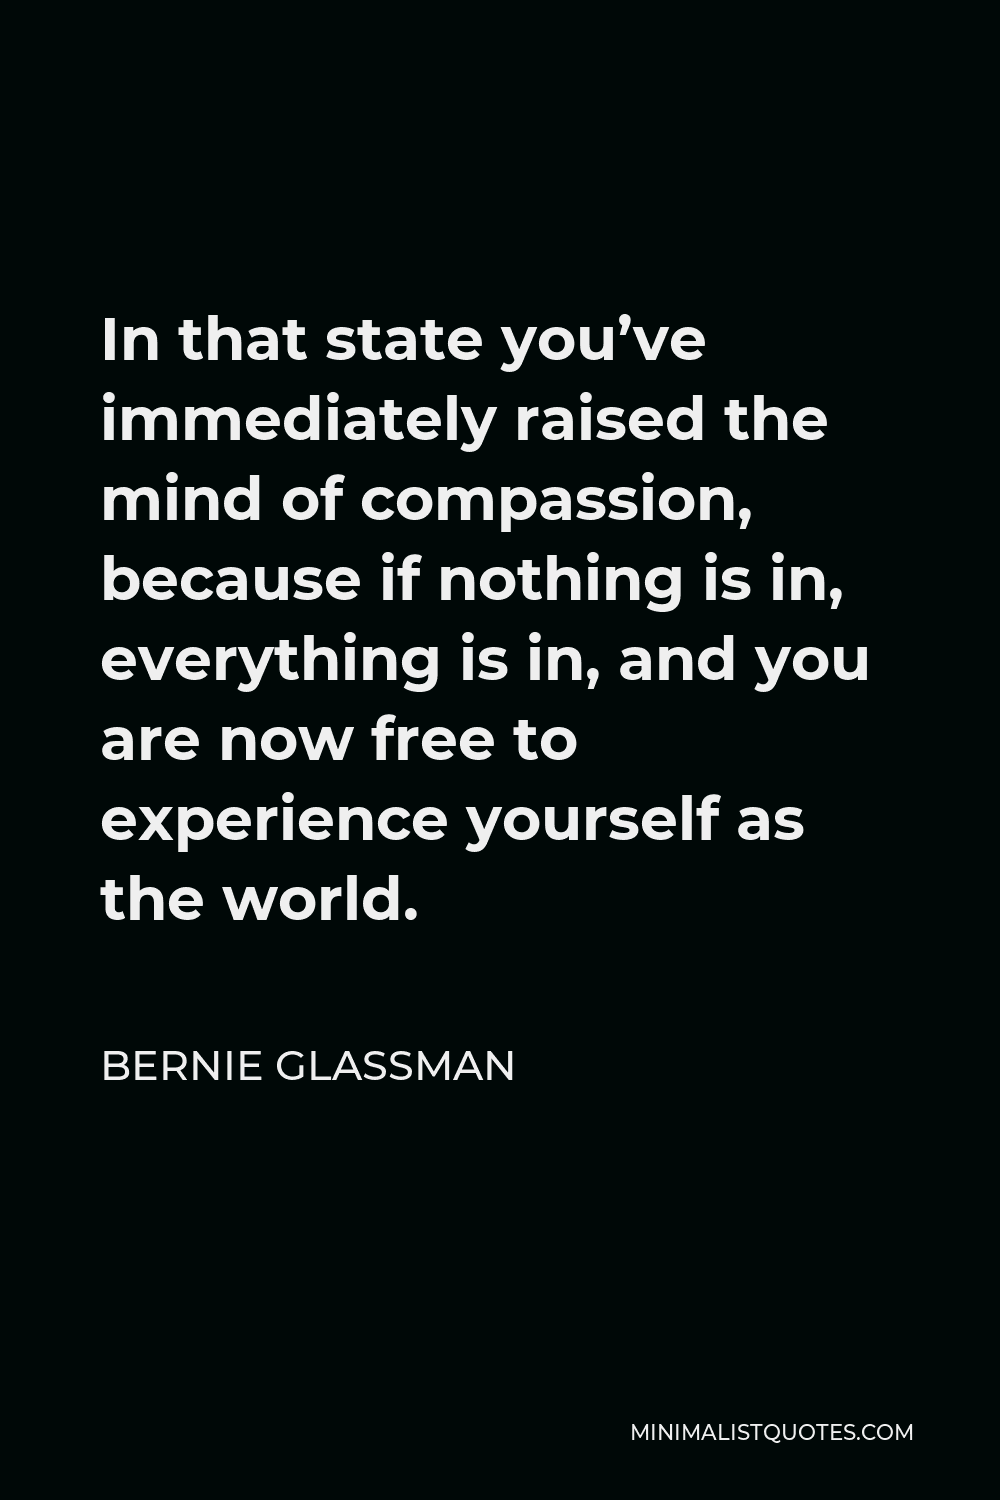 Bernie Glassman Quote - In that state you’ve immediately raised the mind of compassion, because if nothing is in, everything is in, and you are now free to experience yourself as the world.